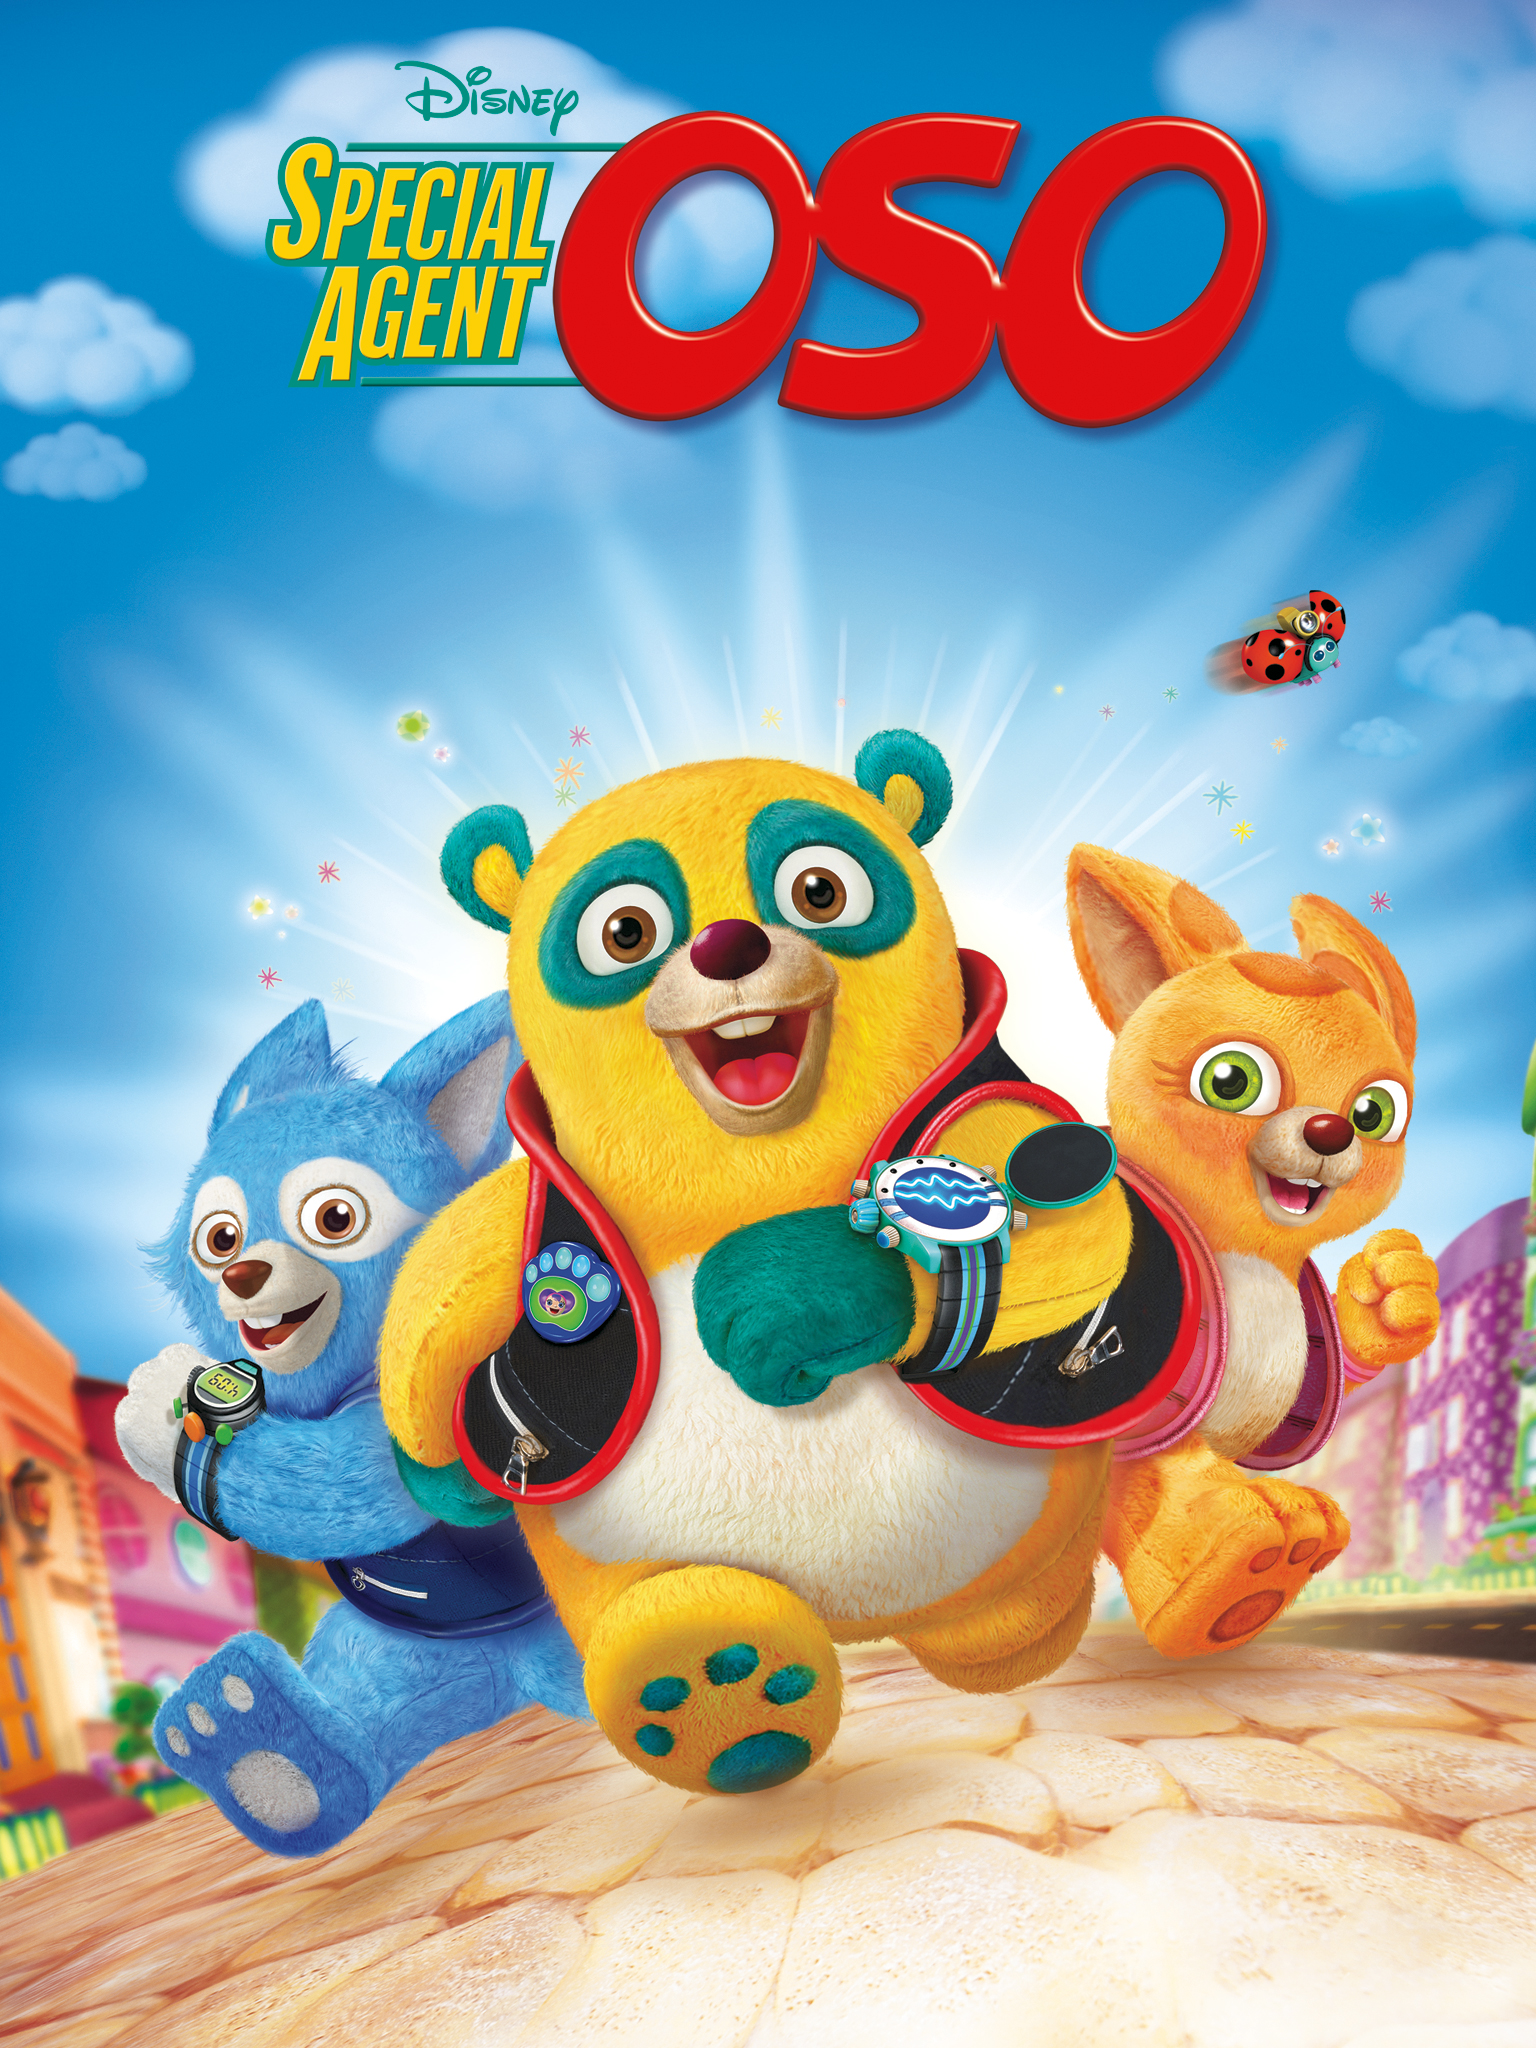 https://static.wikia.nocookie.net/international-entertainment-project/images/c/ca/Special_Agent_Oso_-_poster.jpg/revision/latest?cb=20230316154346